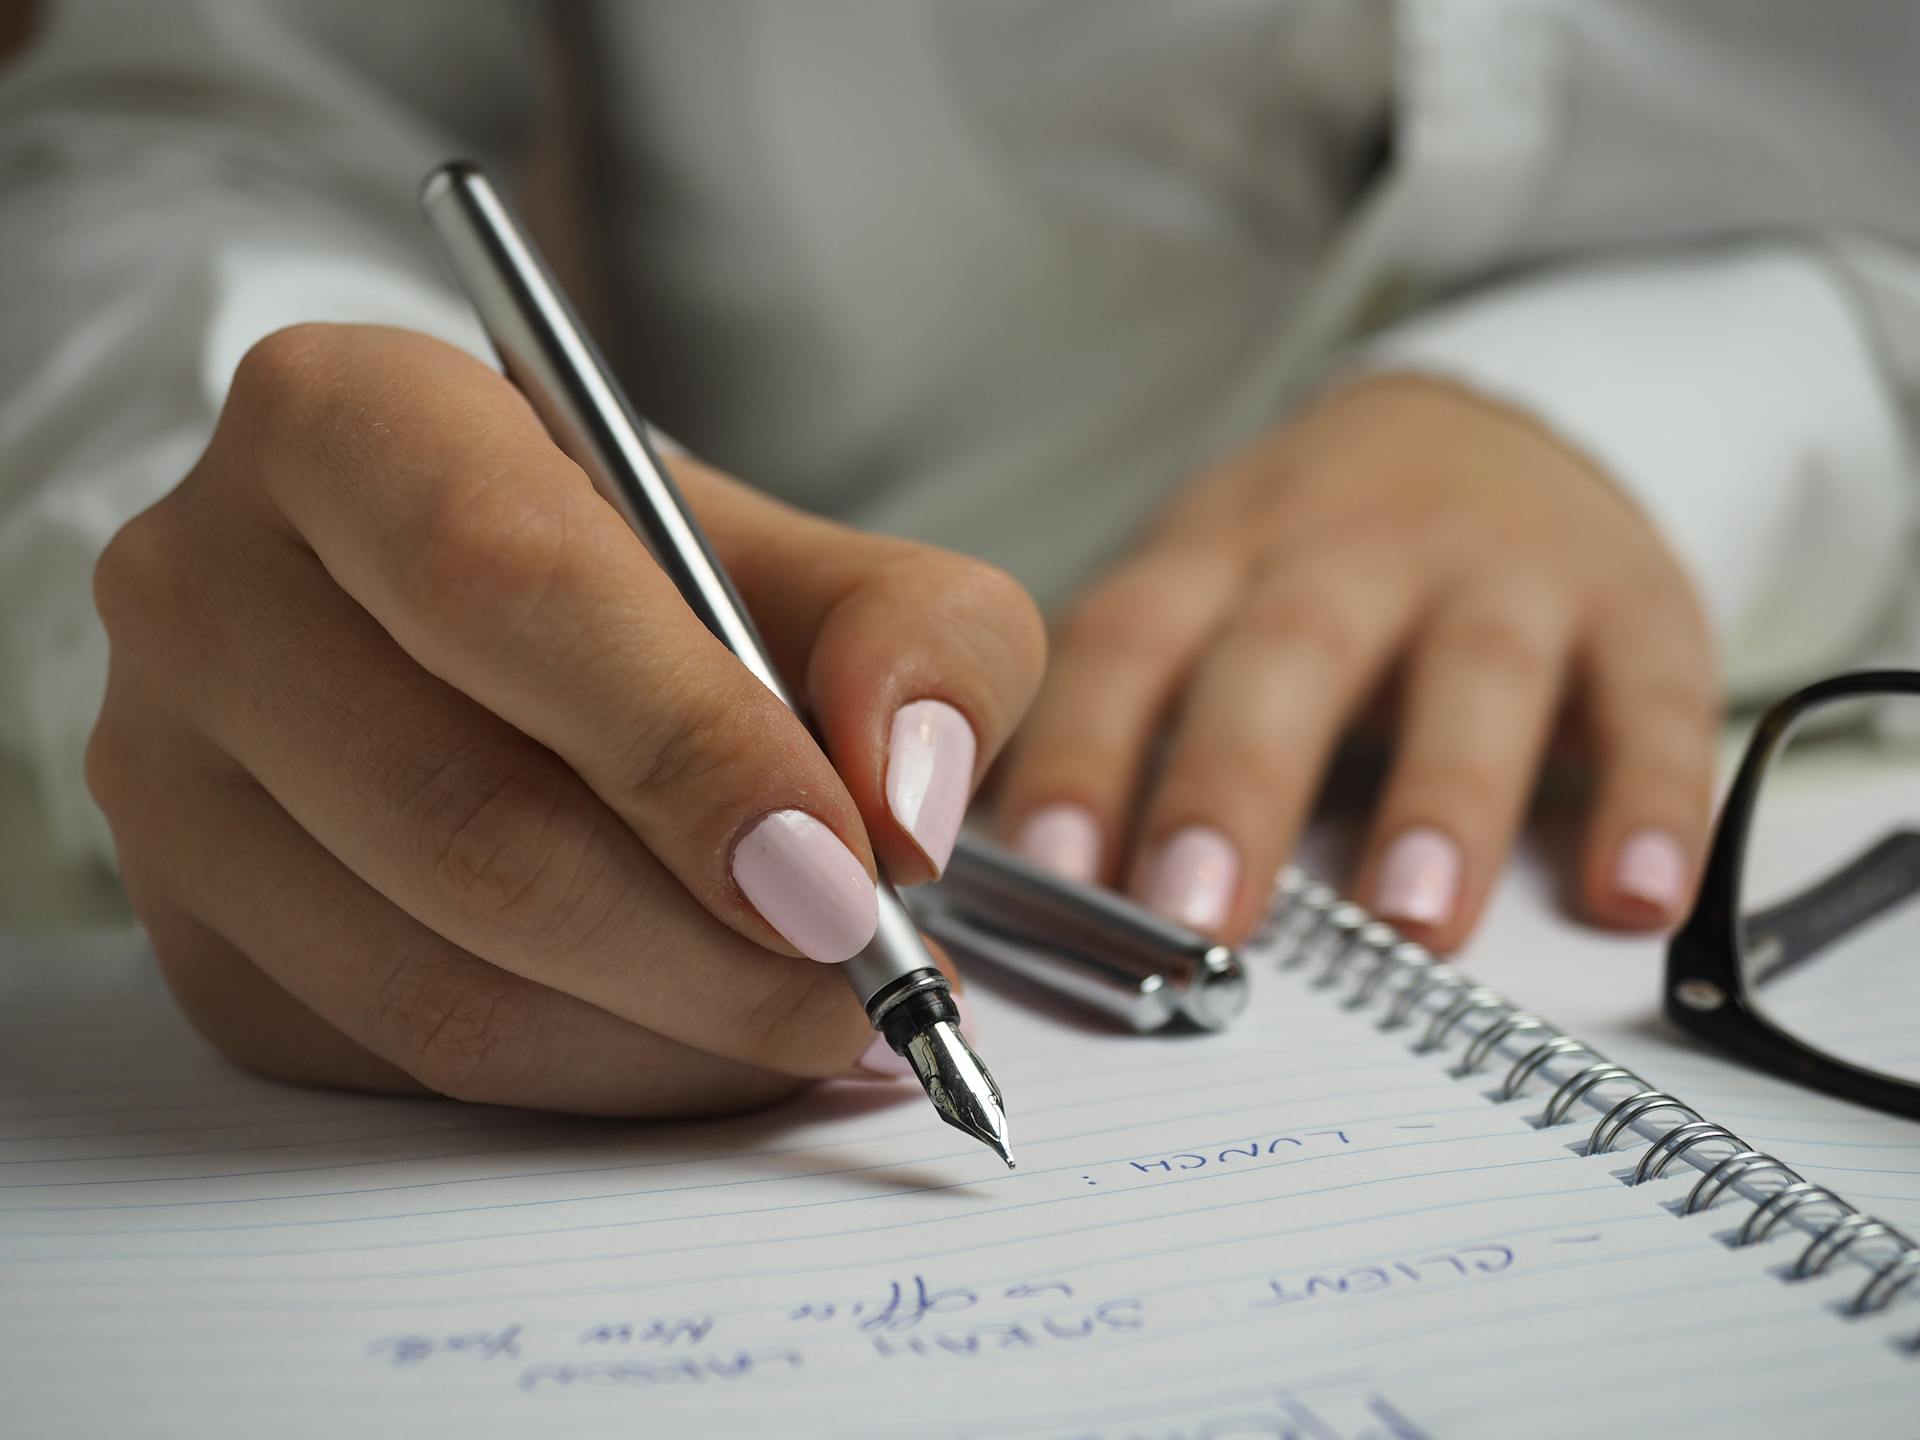 A person writing in a notebook | Source: Pexels